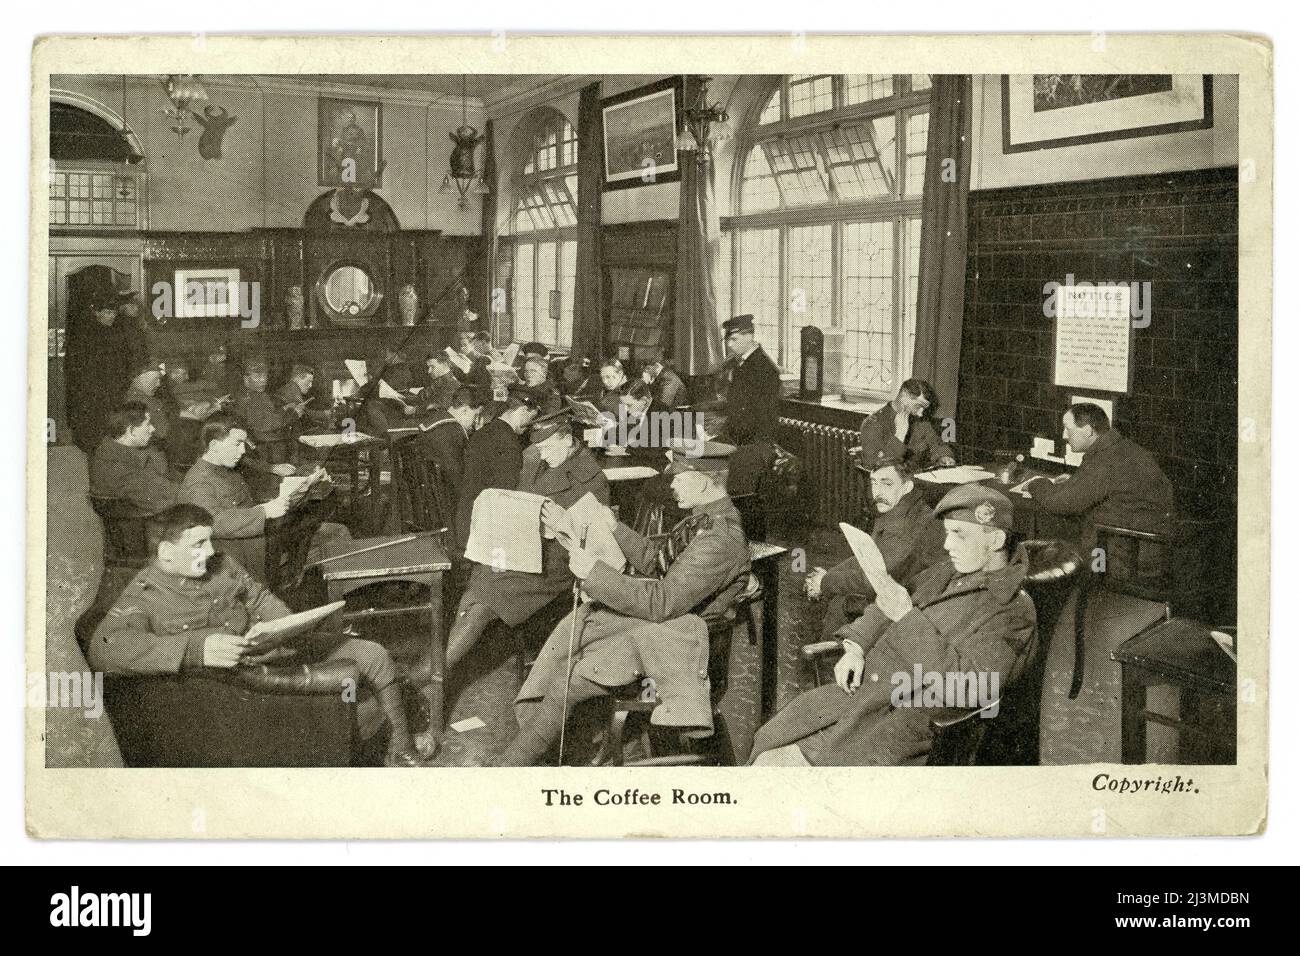 Original WW1 era postcard of The Coffee Room at the Union Jack Club, 91A Waterloo Road, Lambeth, London, U.K. Both army and navy personnel can be seen relaxing and reading newspapers.  The Union Jack Club was opened in 1907 providing accommodation, a restaurant, meeting and reading rooms for servicemen whilst in London. It saw much use during both world wars. Postcard published by the Union Jack Club. circa 1915. Stock Photo